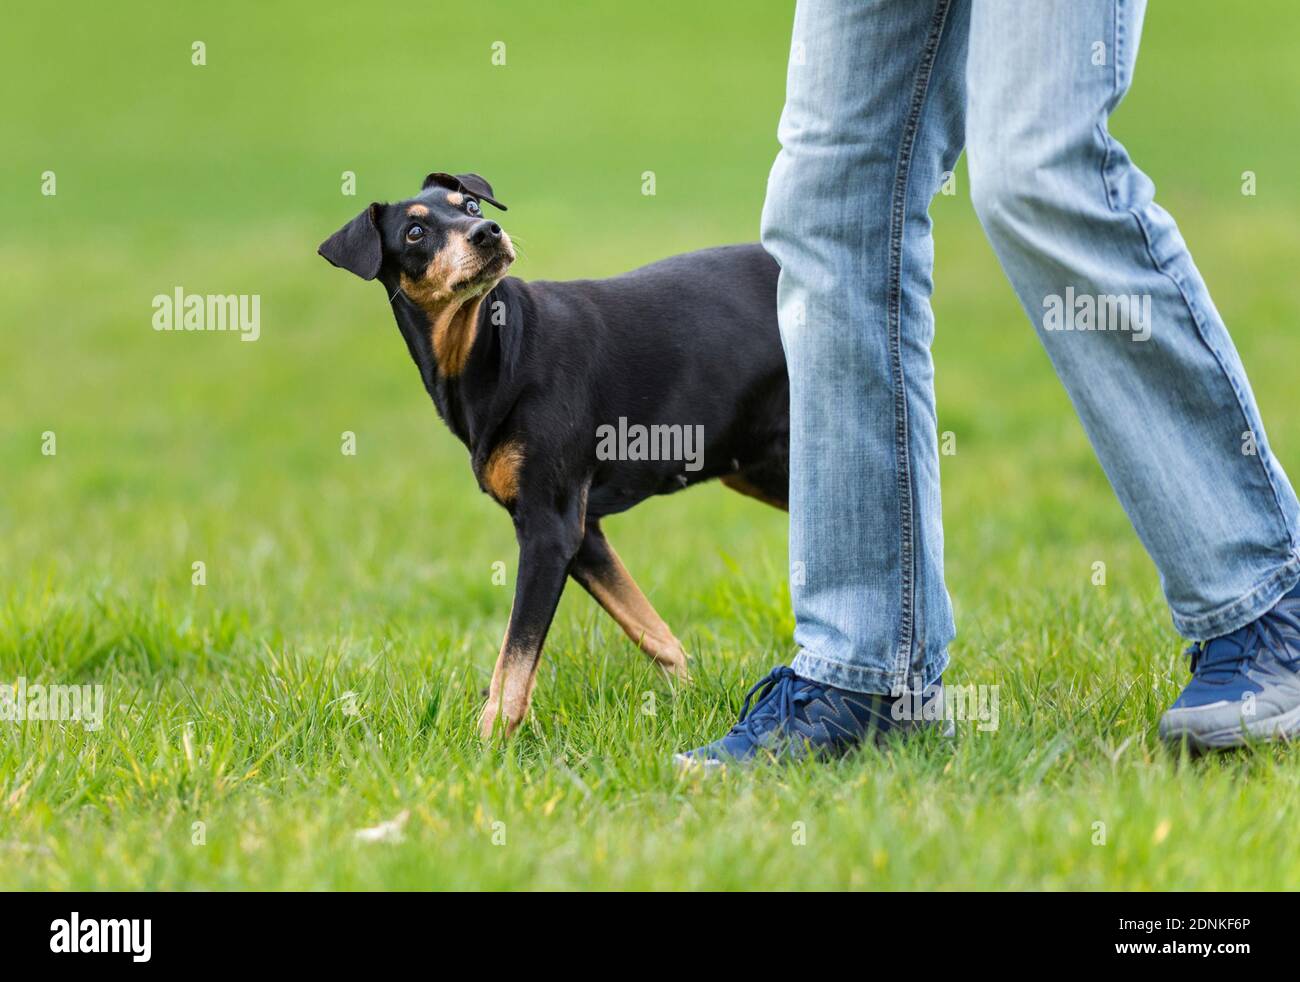 German Pinscher. Adult dog walking next to a person, looking up. Germany Stock Photo